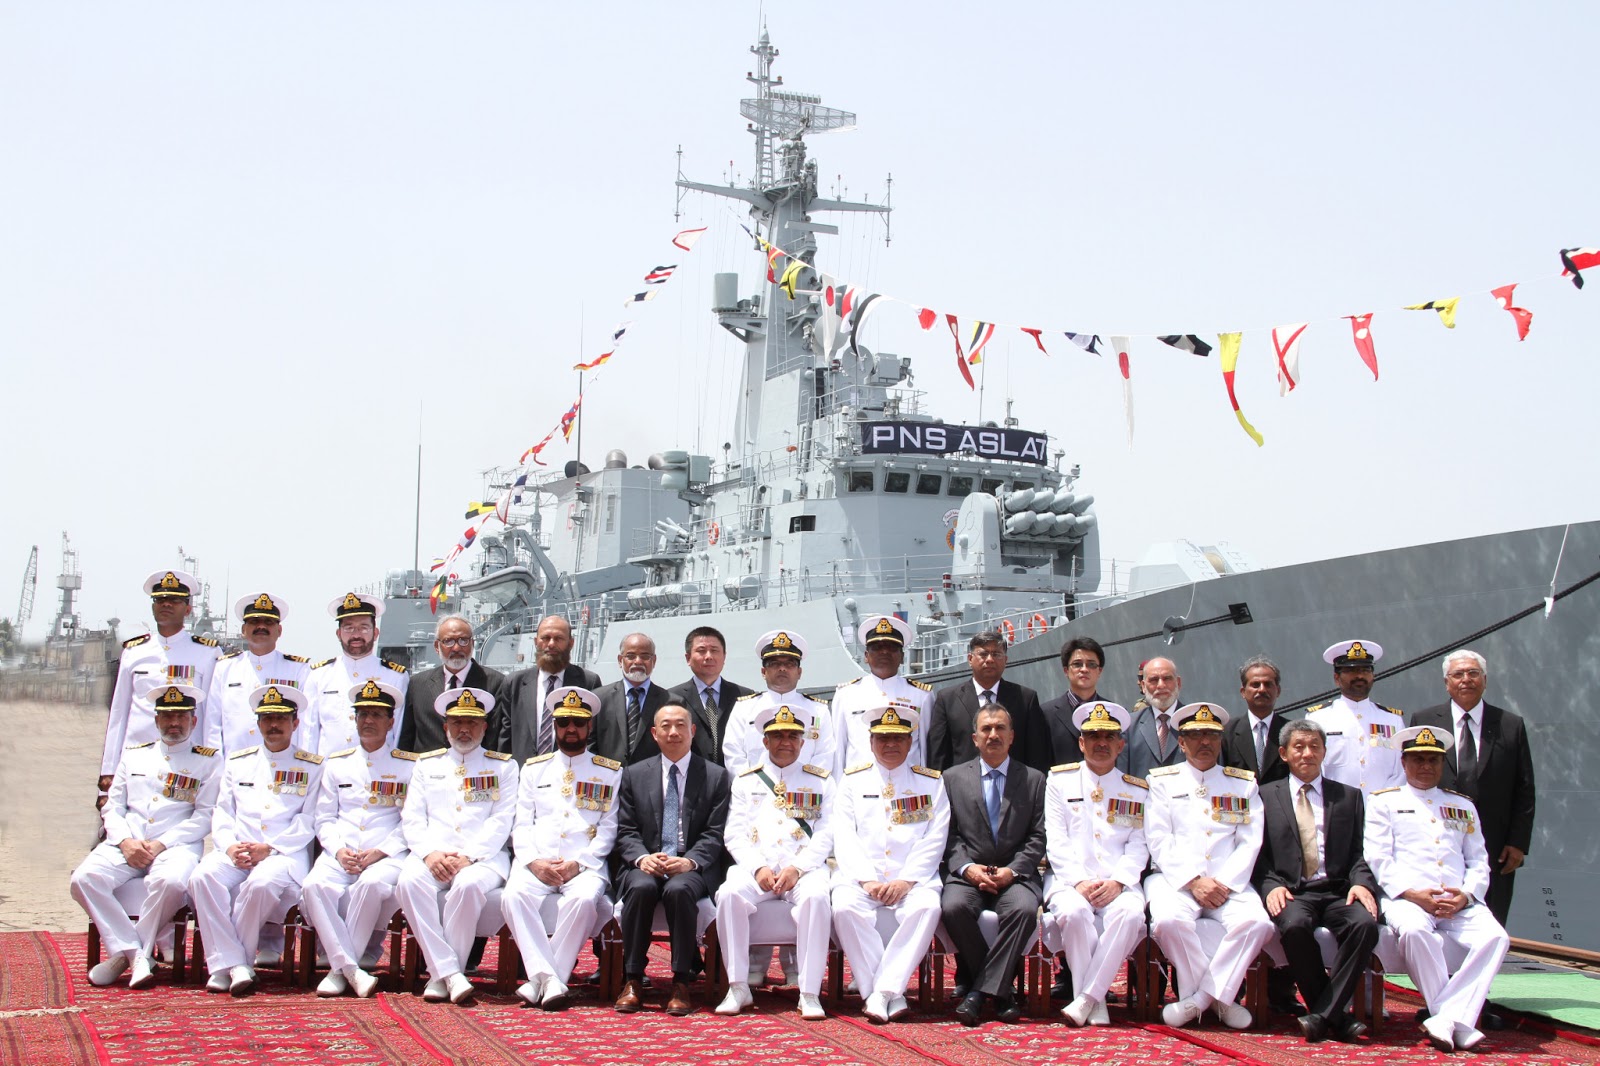 Chief+of+Naval+Staff+Admiral+Muhammad+Asif+Sandila+in+a+group+photo+during+commissioning+ceremony++PNS+ASLAT+(1).JPG